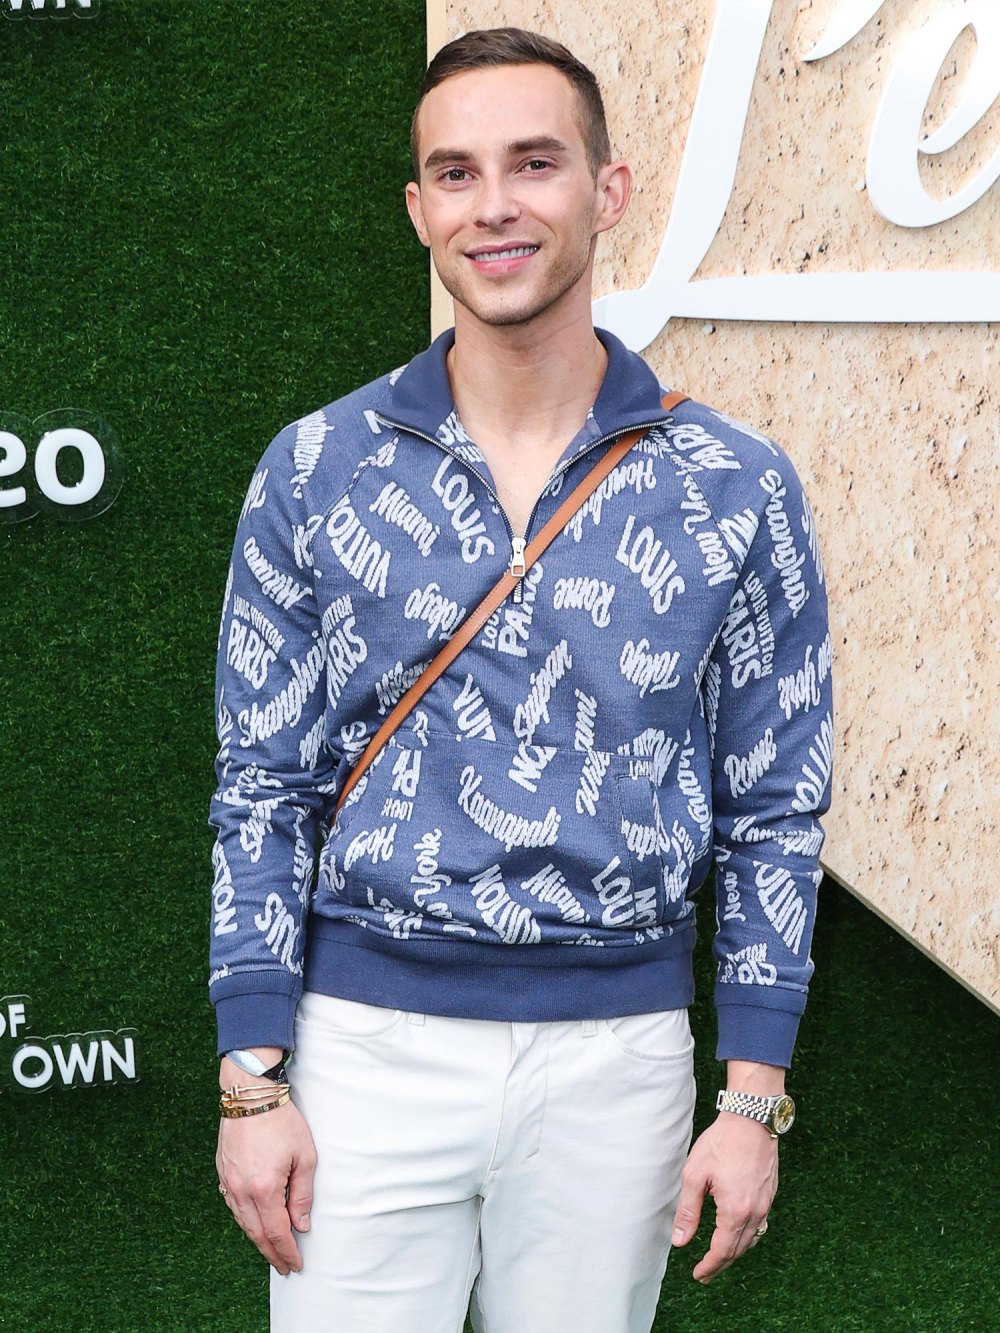 Adam-Rippon--25-Things-You-Don-t-Know-About-Me-(My-First-Celebrity-Crush-Was-the-Blue-Power-Ranger) -455